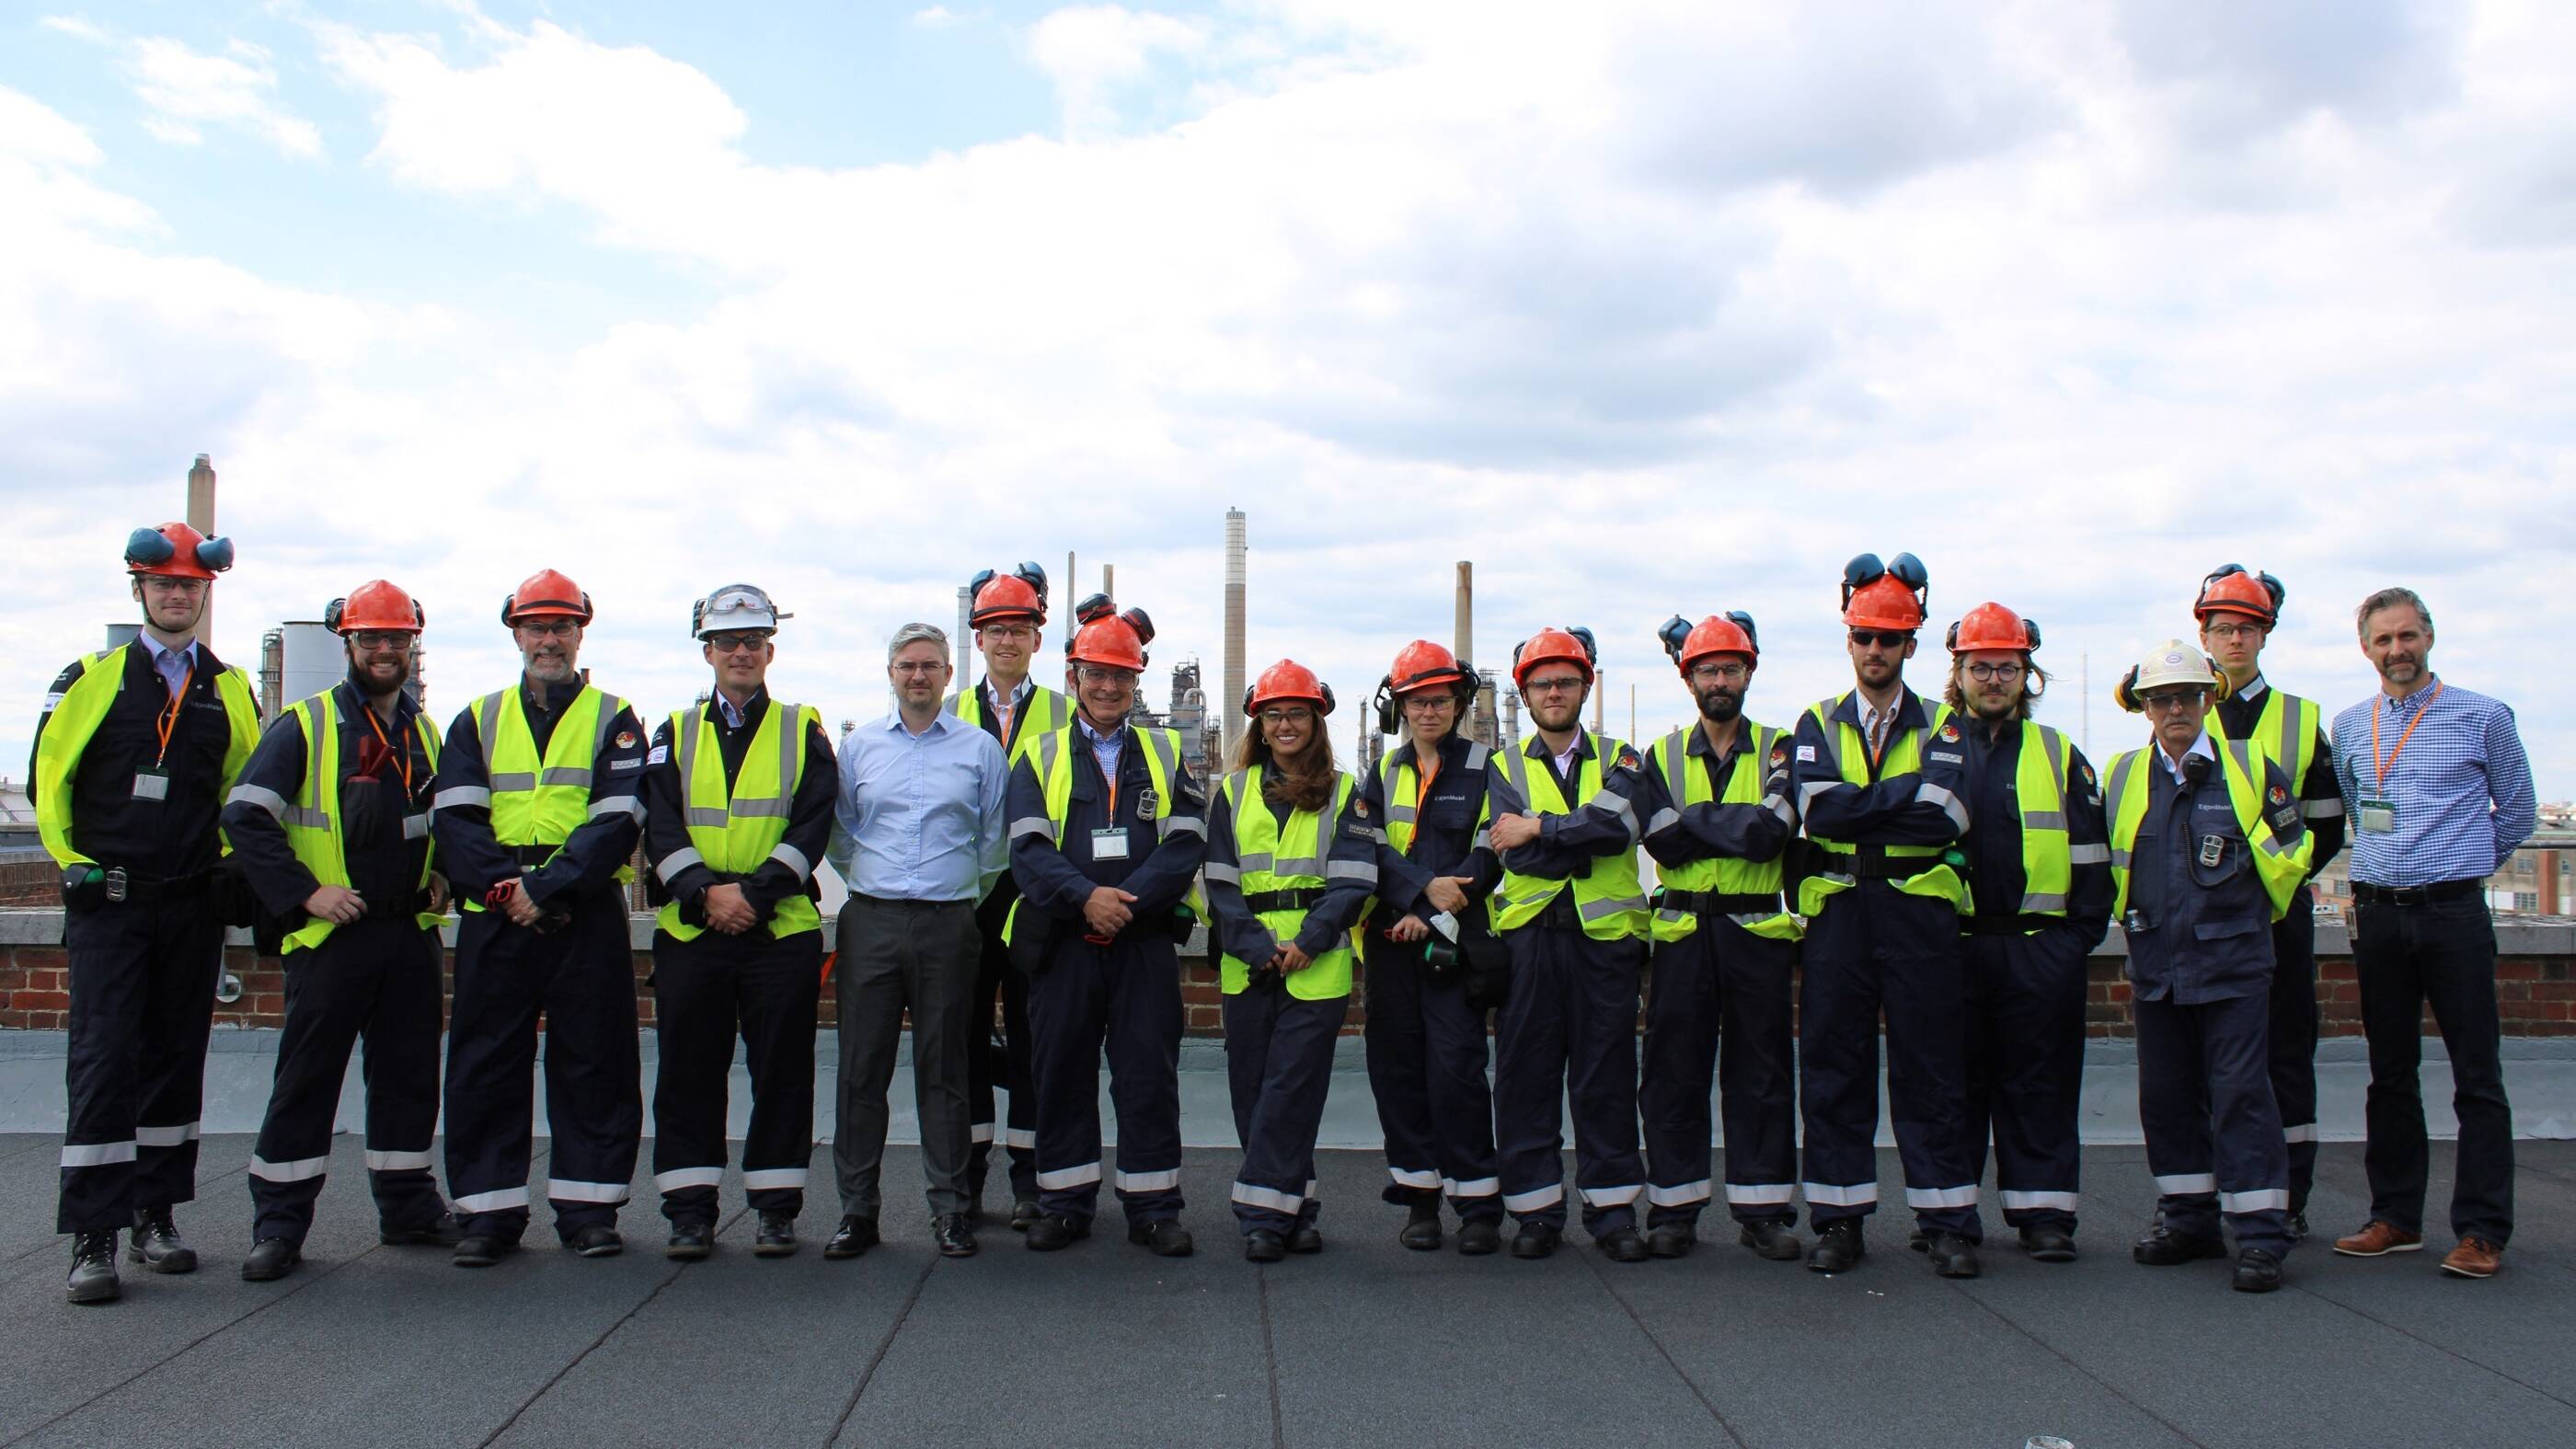 UK Government officials visit Fawley